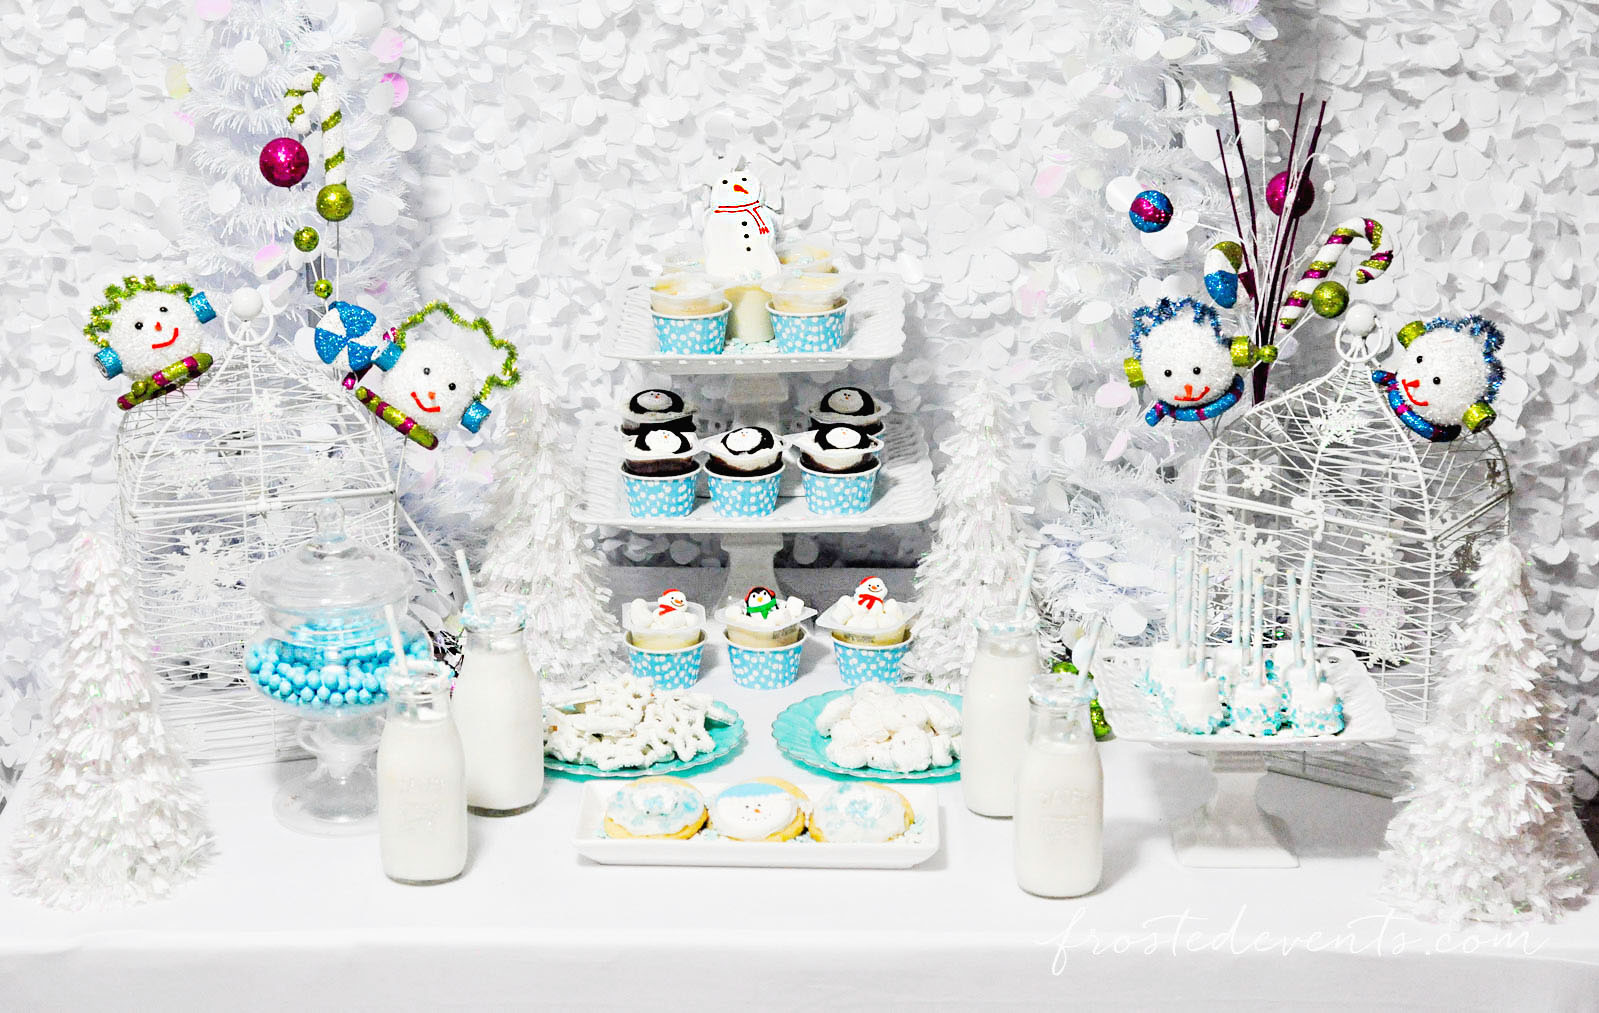 Winter Wonderland Party Winter Party Ideas with Snack Pack Christmas Treats frostedevents.com